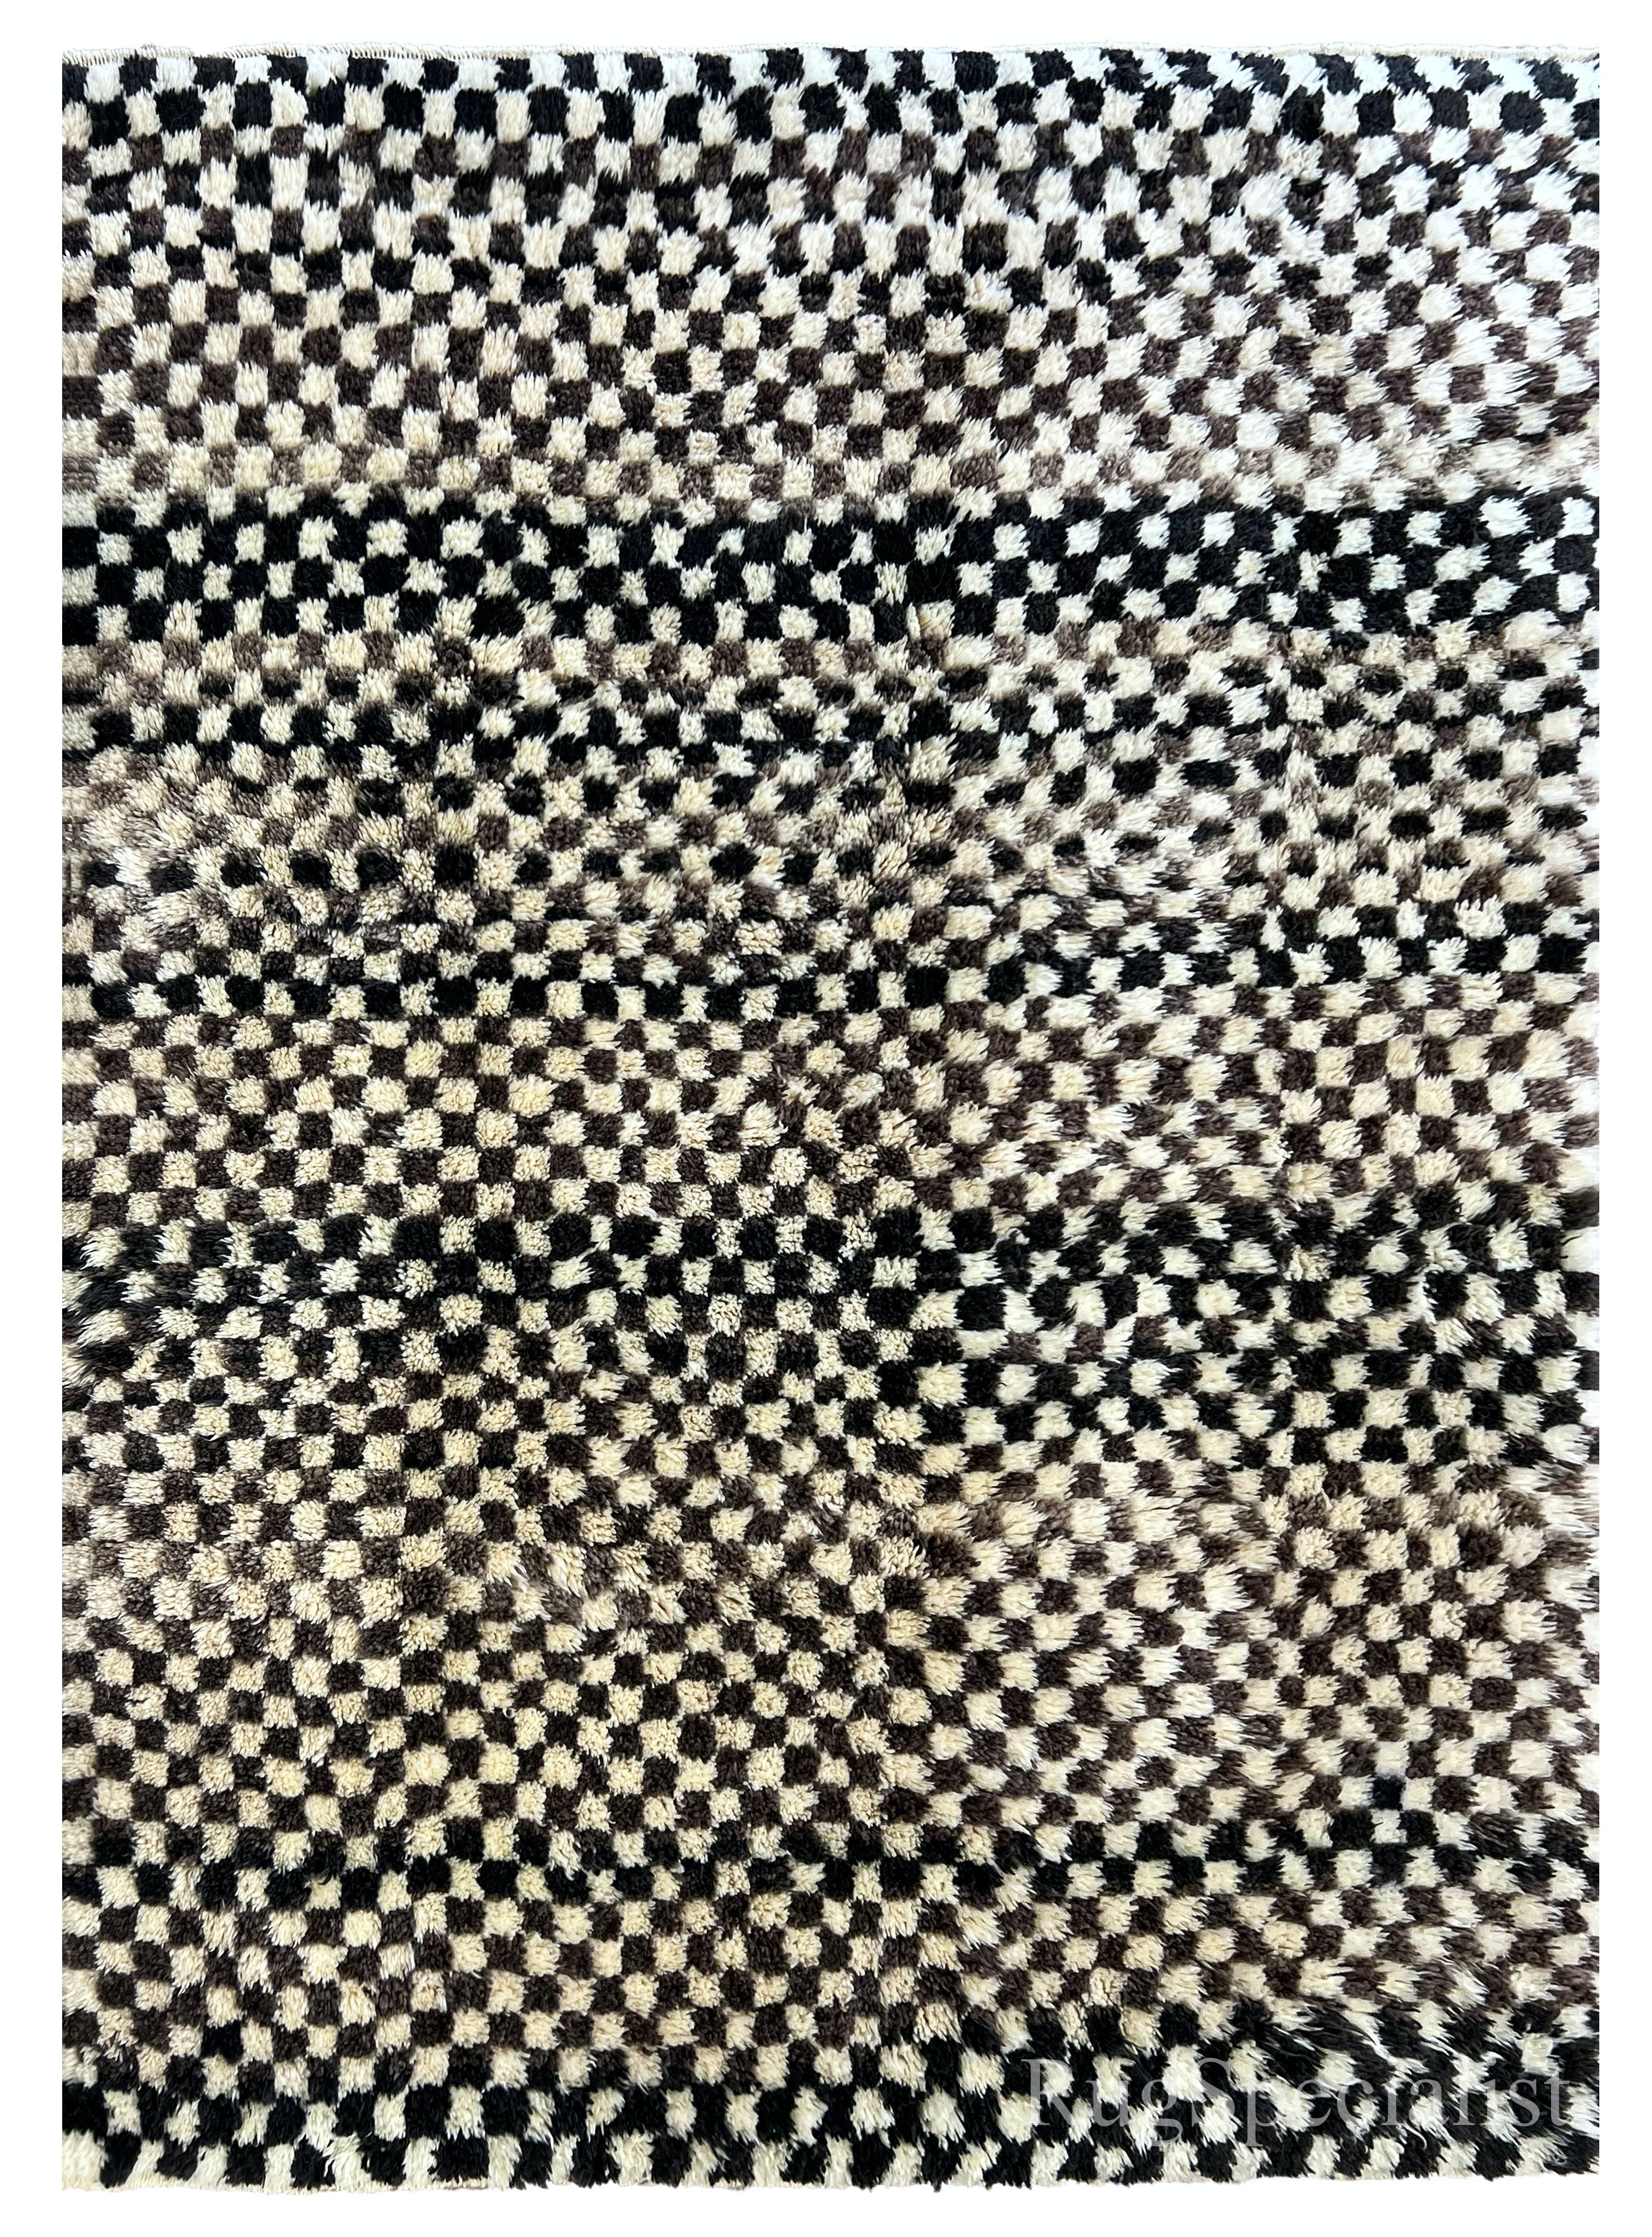 7.4x9.2 Ft Checkered Handmade Tulu Rug in Beige, Black & Black, All Natural Wool For Sale